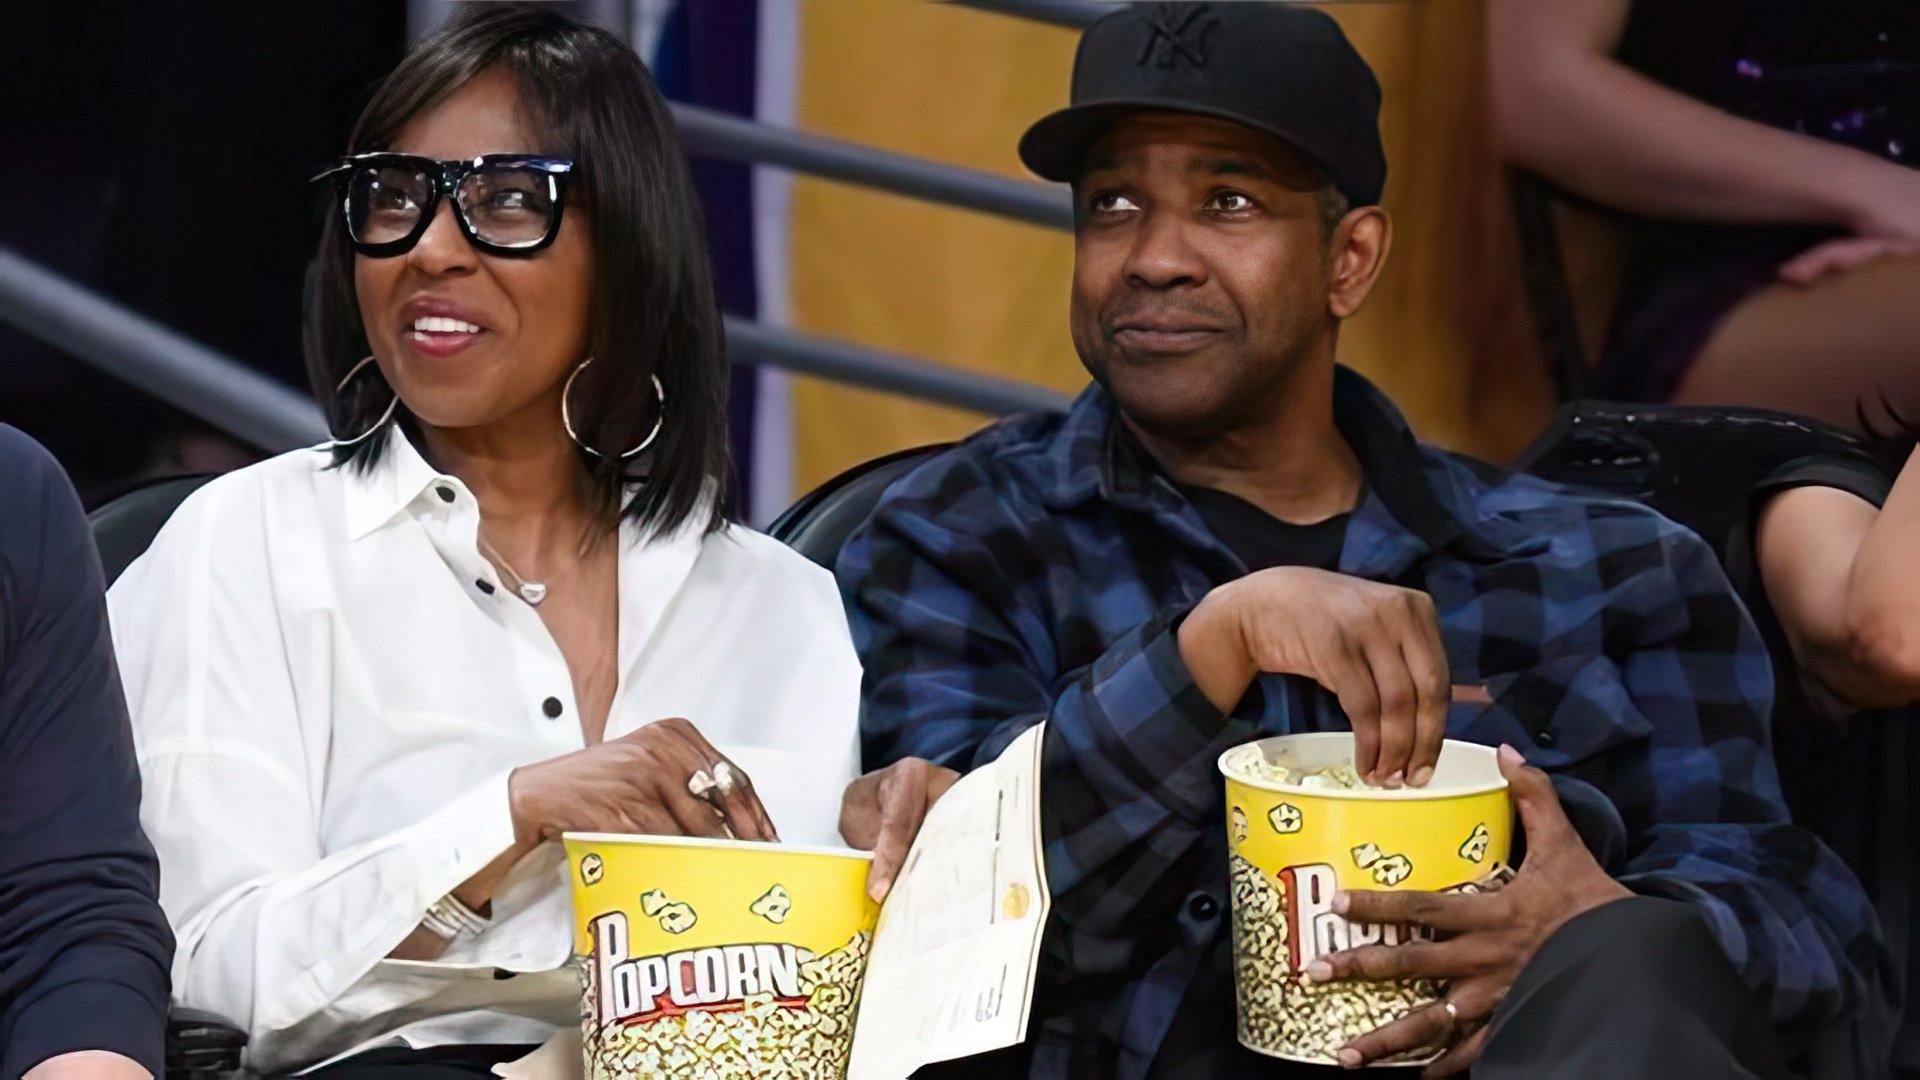 Denzel Washington and his wife at a basketball match